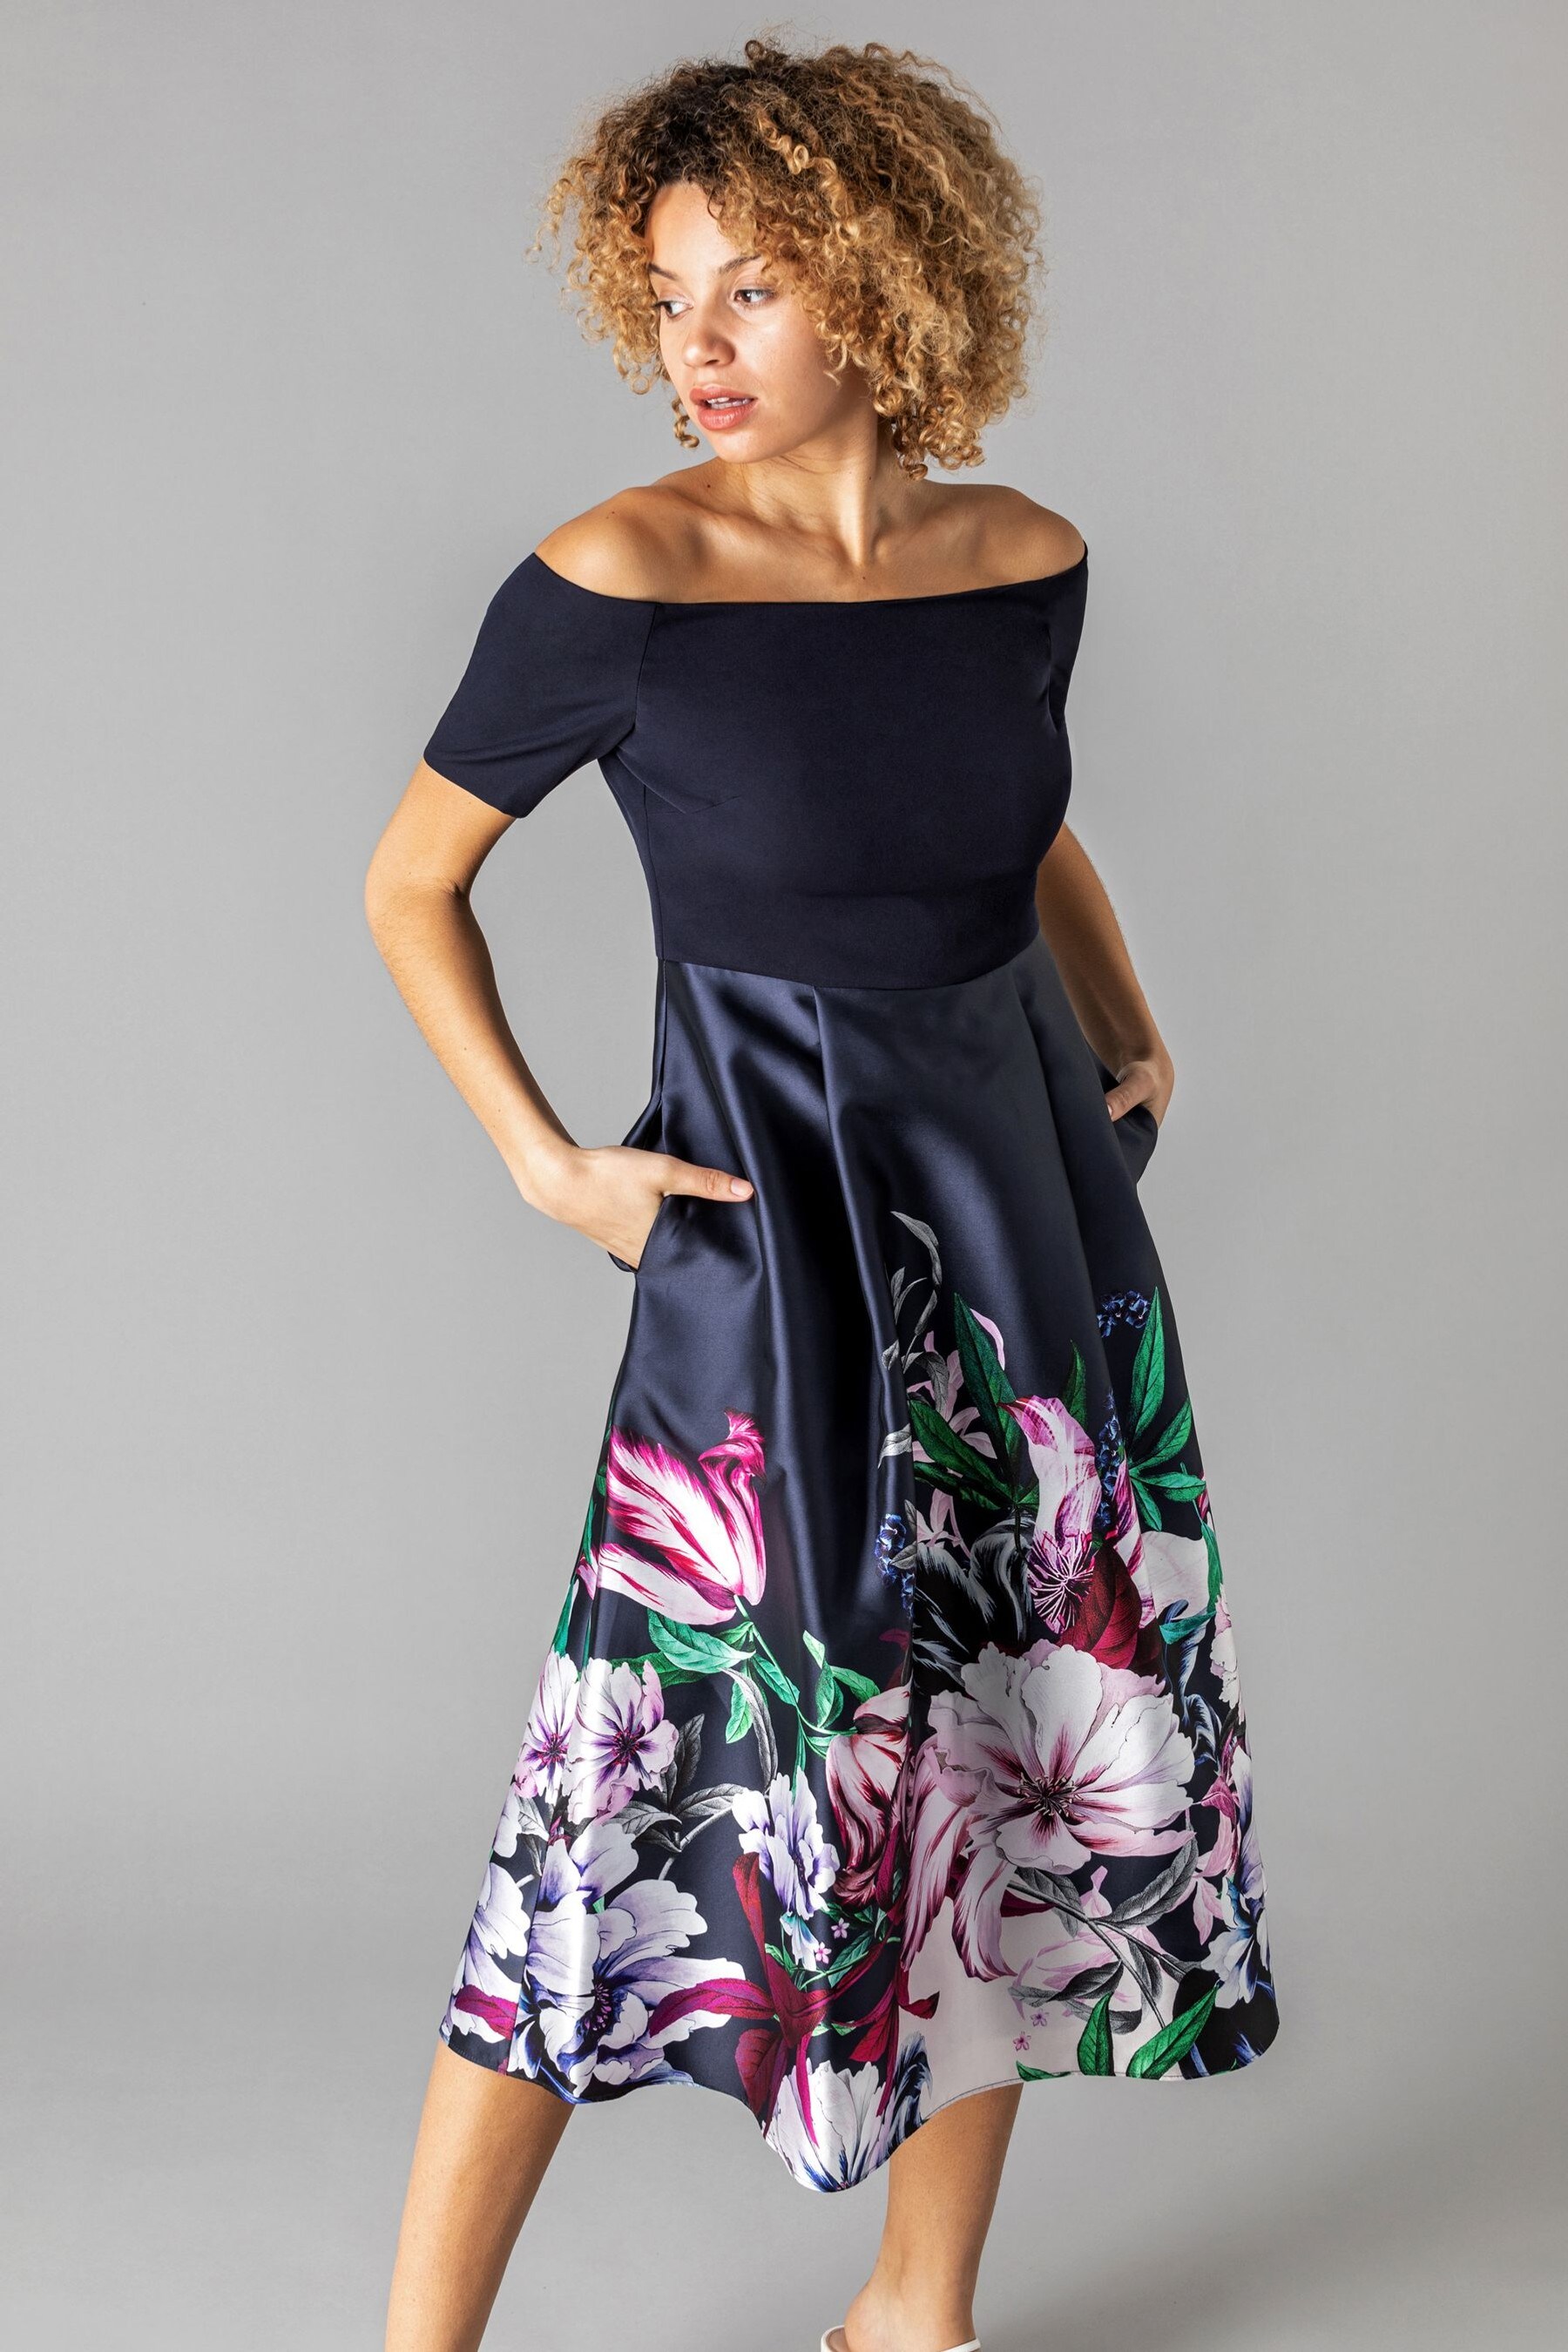 Buy Roman Bardot Floral Fit & Flare Dress from the Next UK online shop